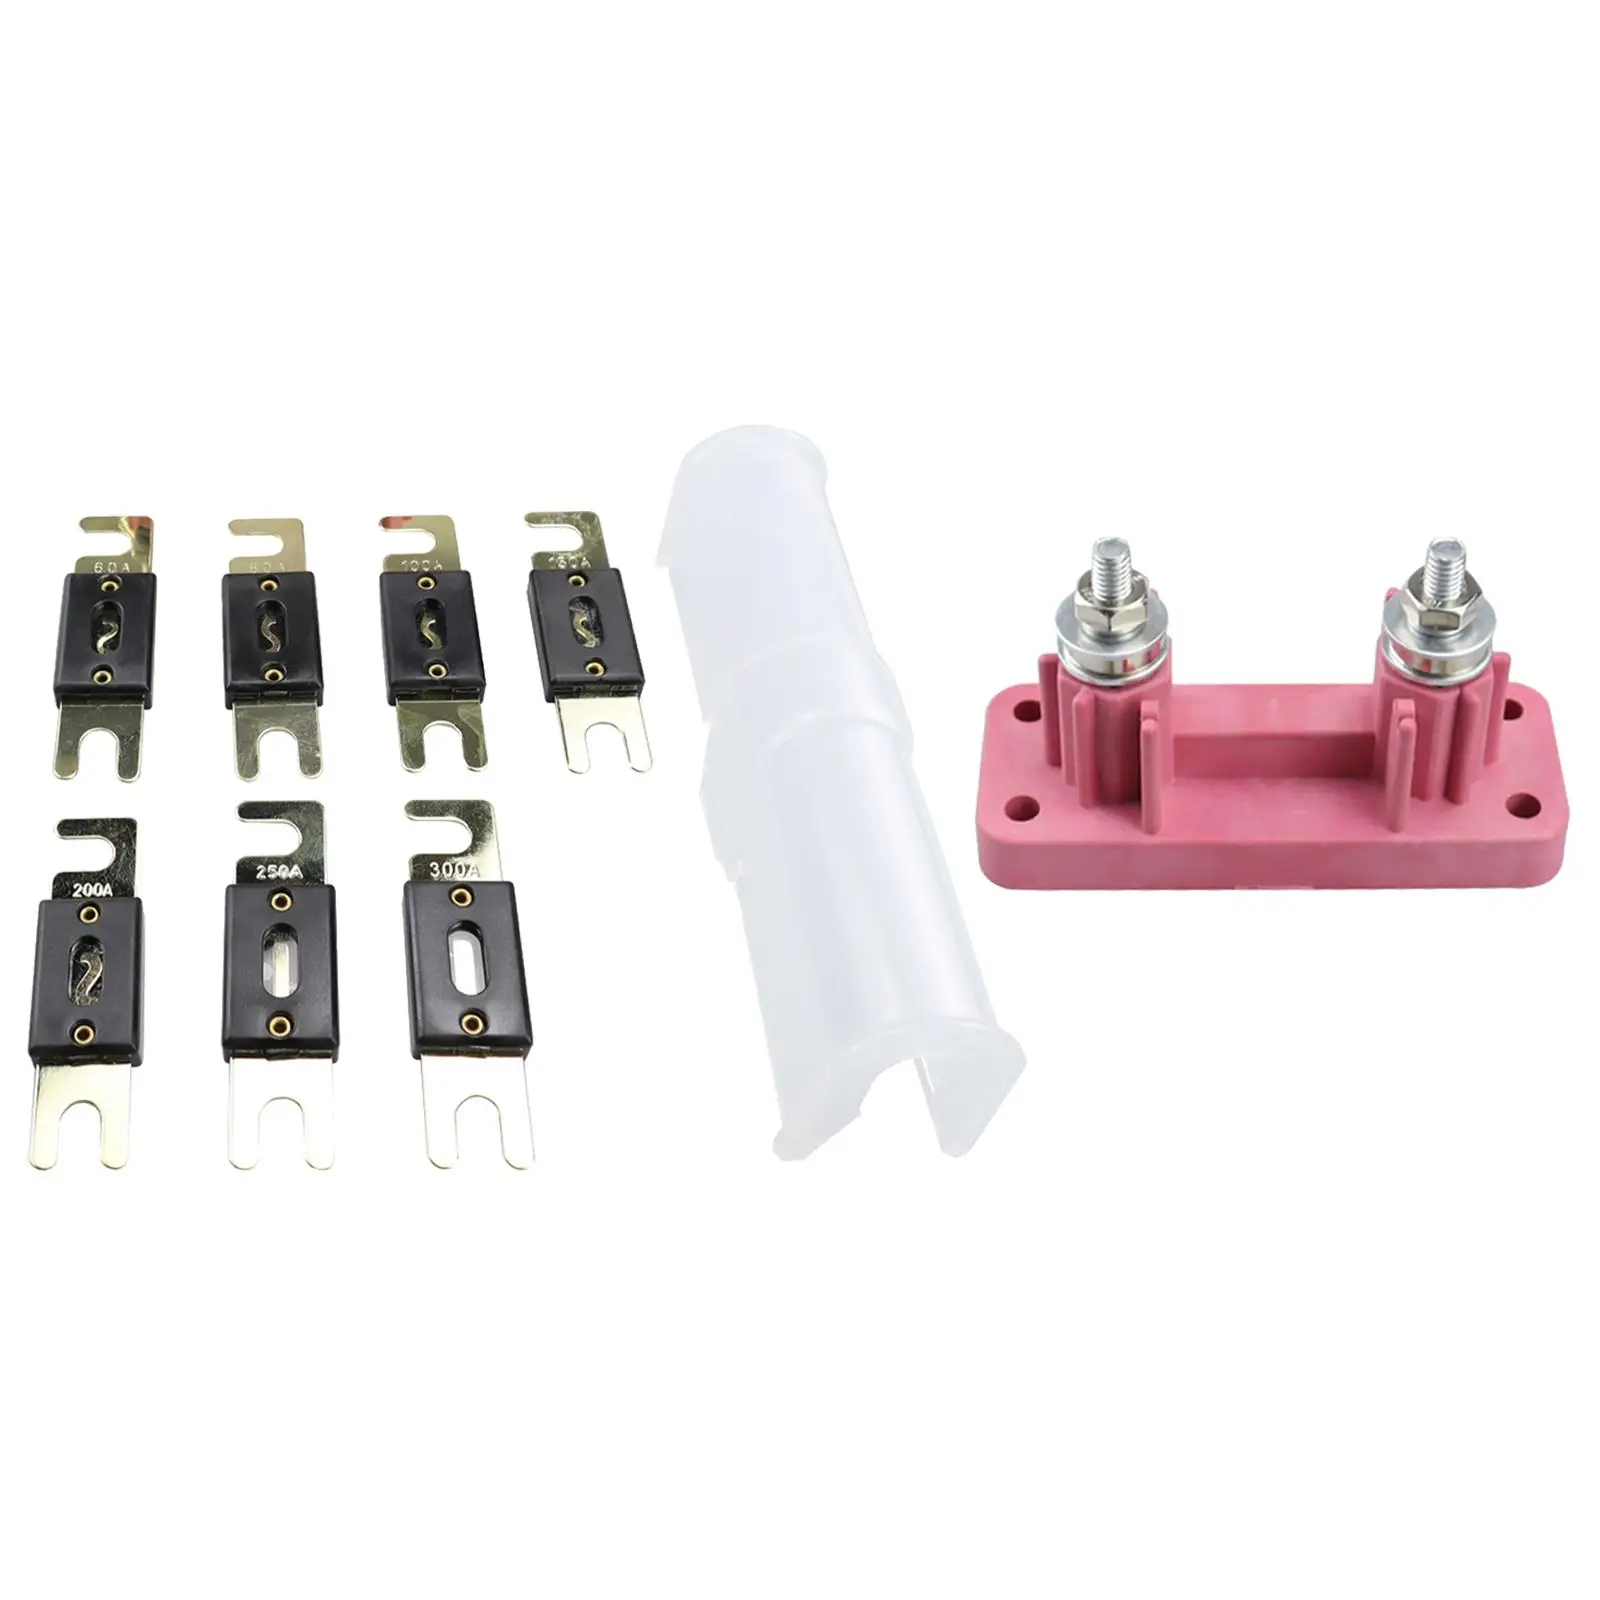 

Fuse Holder Kit Easily Install Stable Performance Fuse Block Replace Junction Box for Ship Car RV Truck Off Road Vehicle